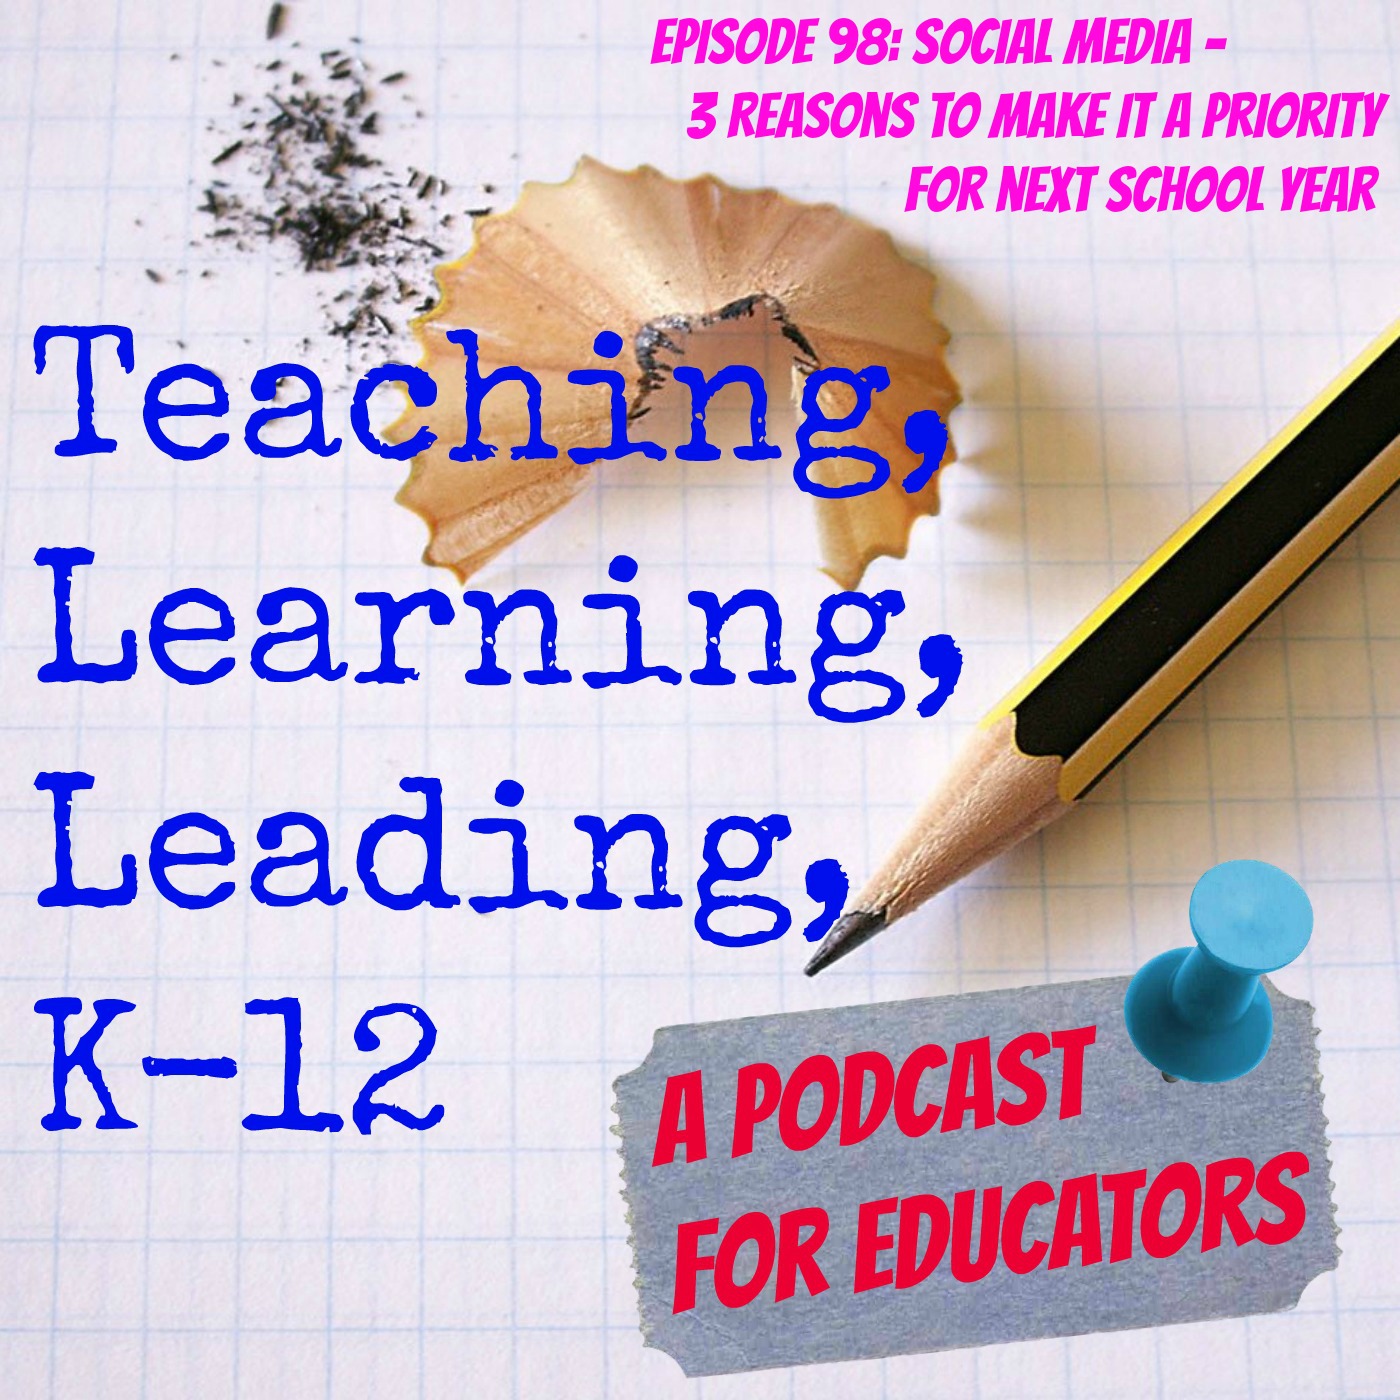 Episode 98: Social Media - 3 Reasons to Make it a Priority for this Next School Year